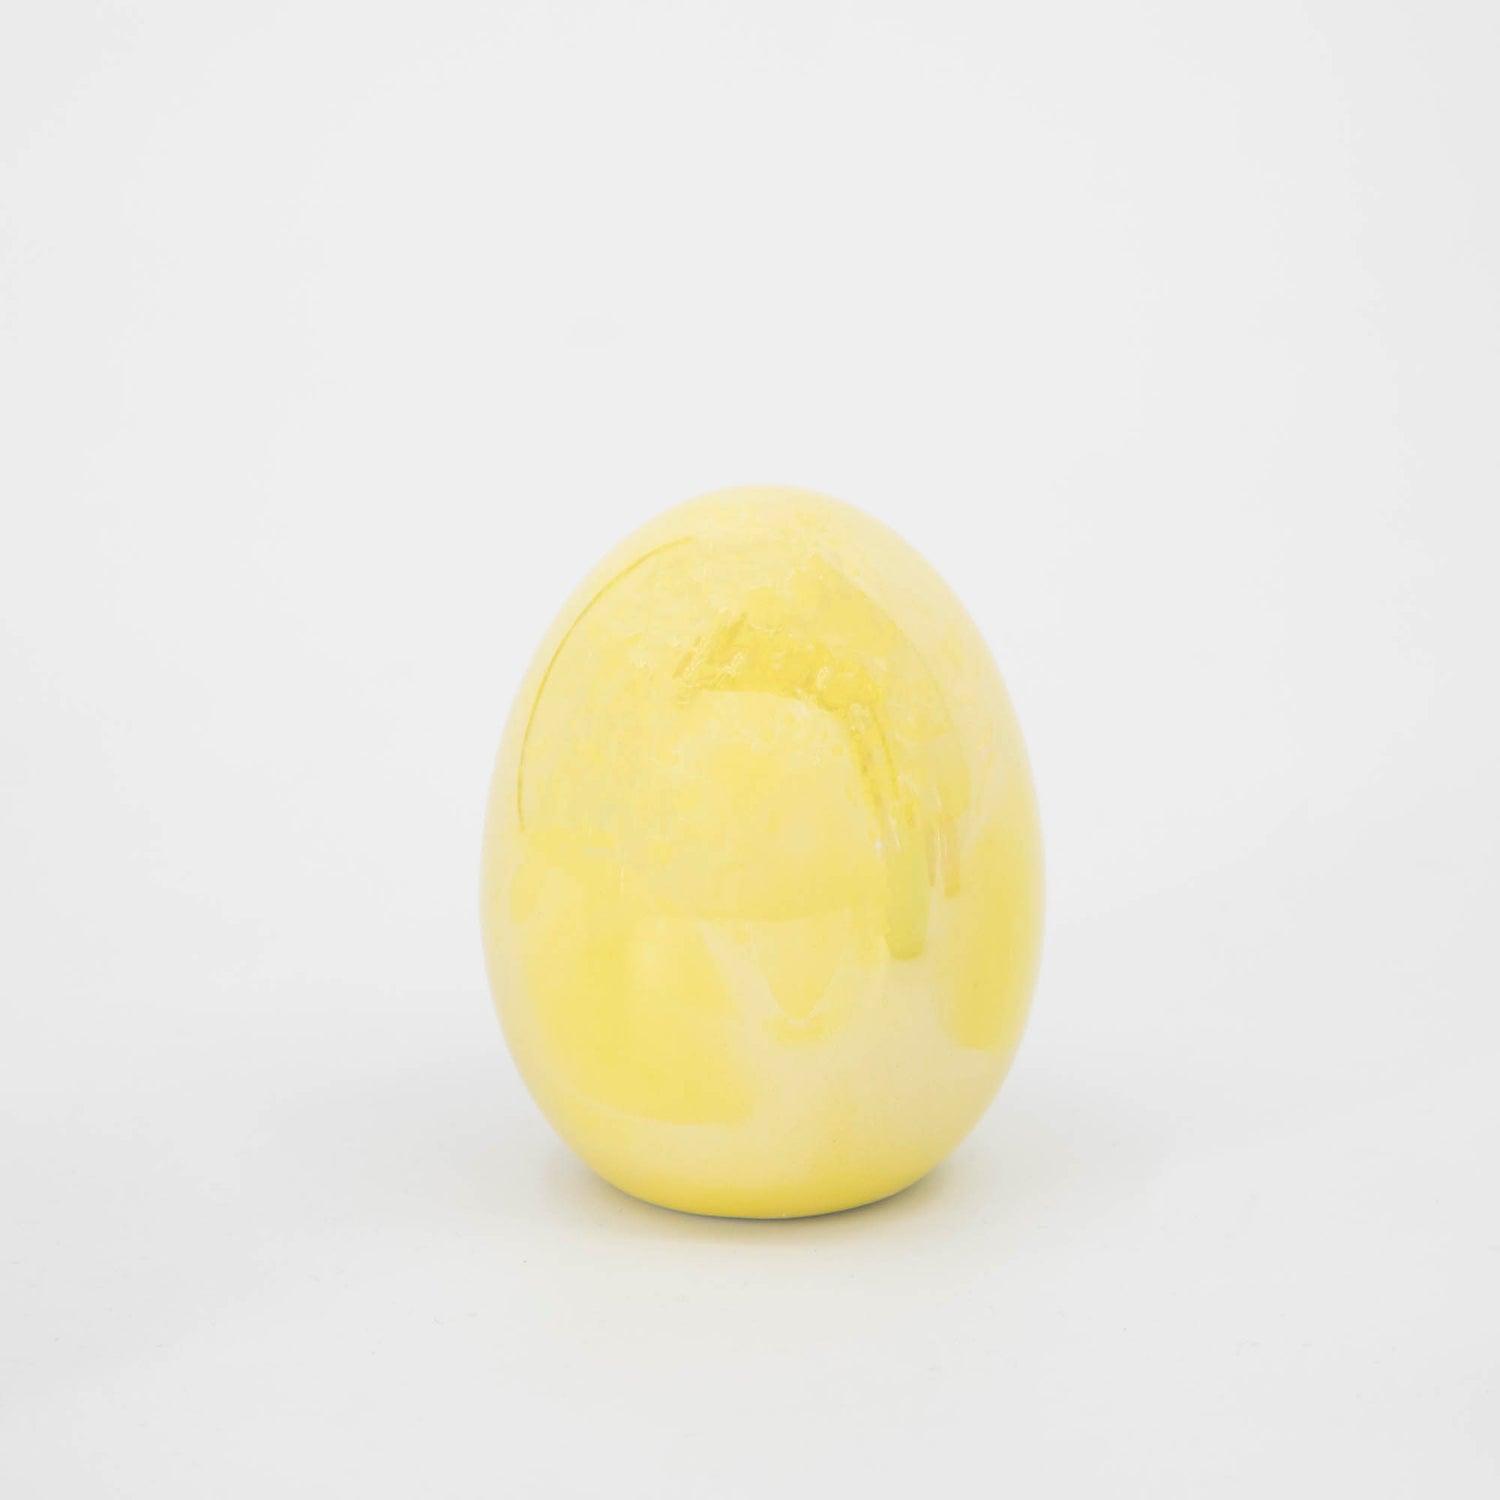 A Small Iridescent Egg decorated for Easter on a white background by Glitterville.